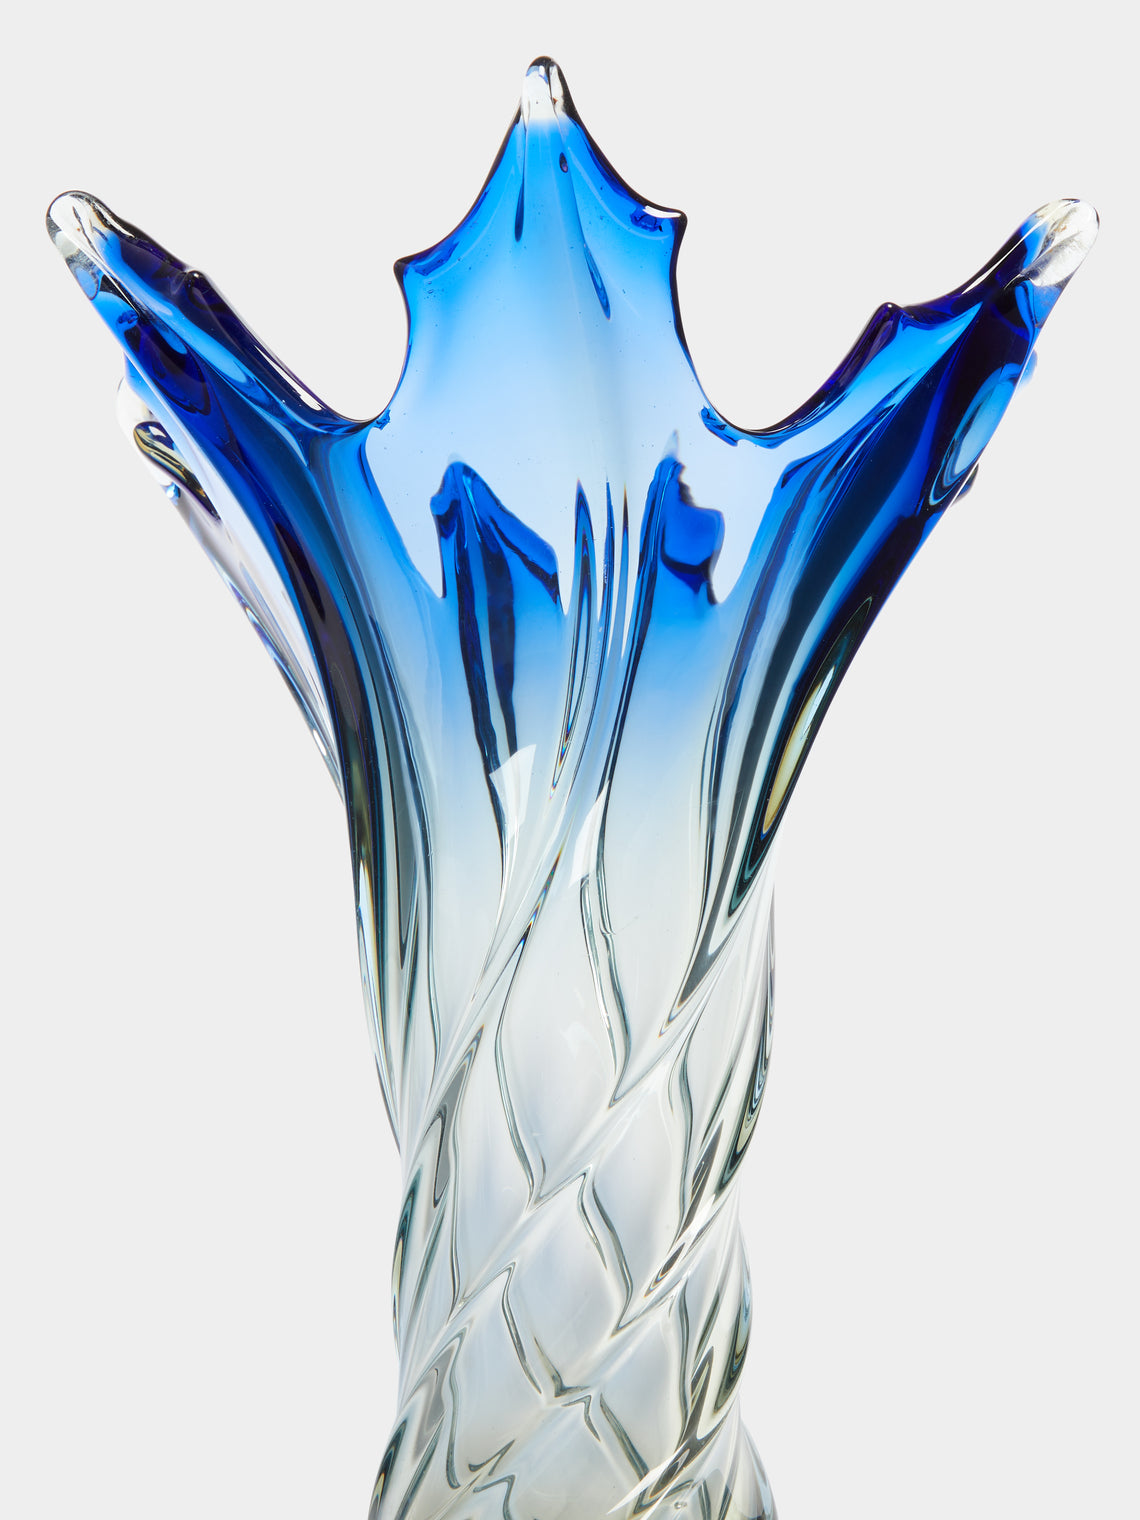 Antique and Vintage - 1960s Murano Glass Vase -  - ABASK